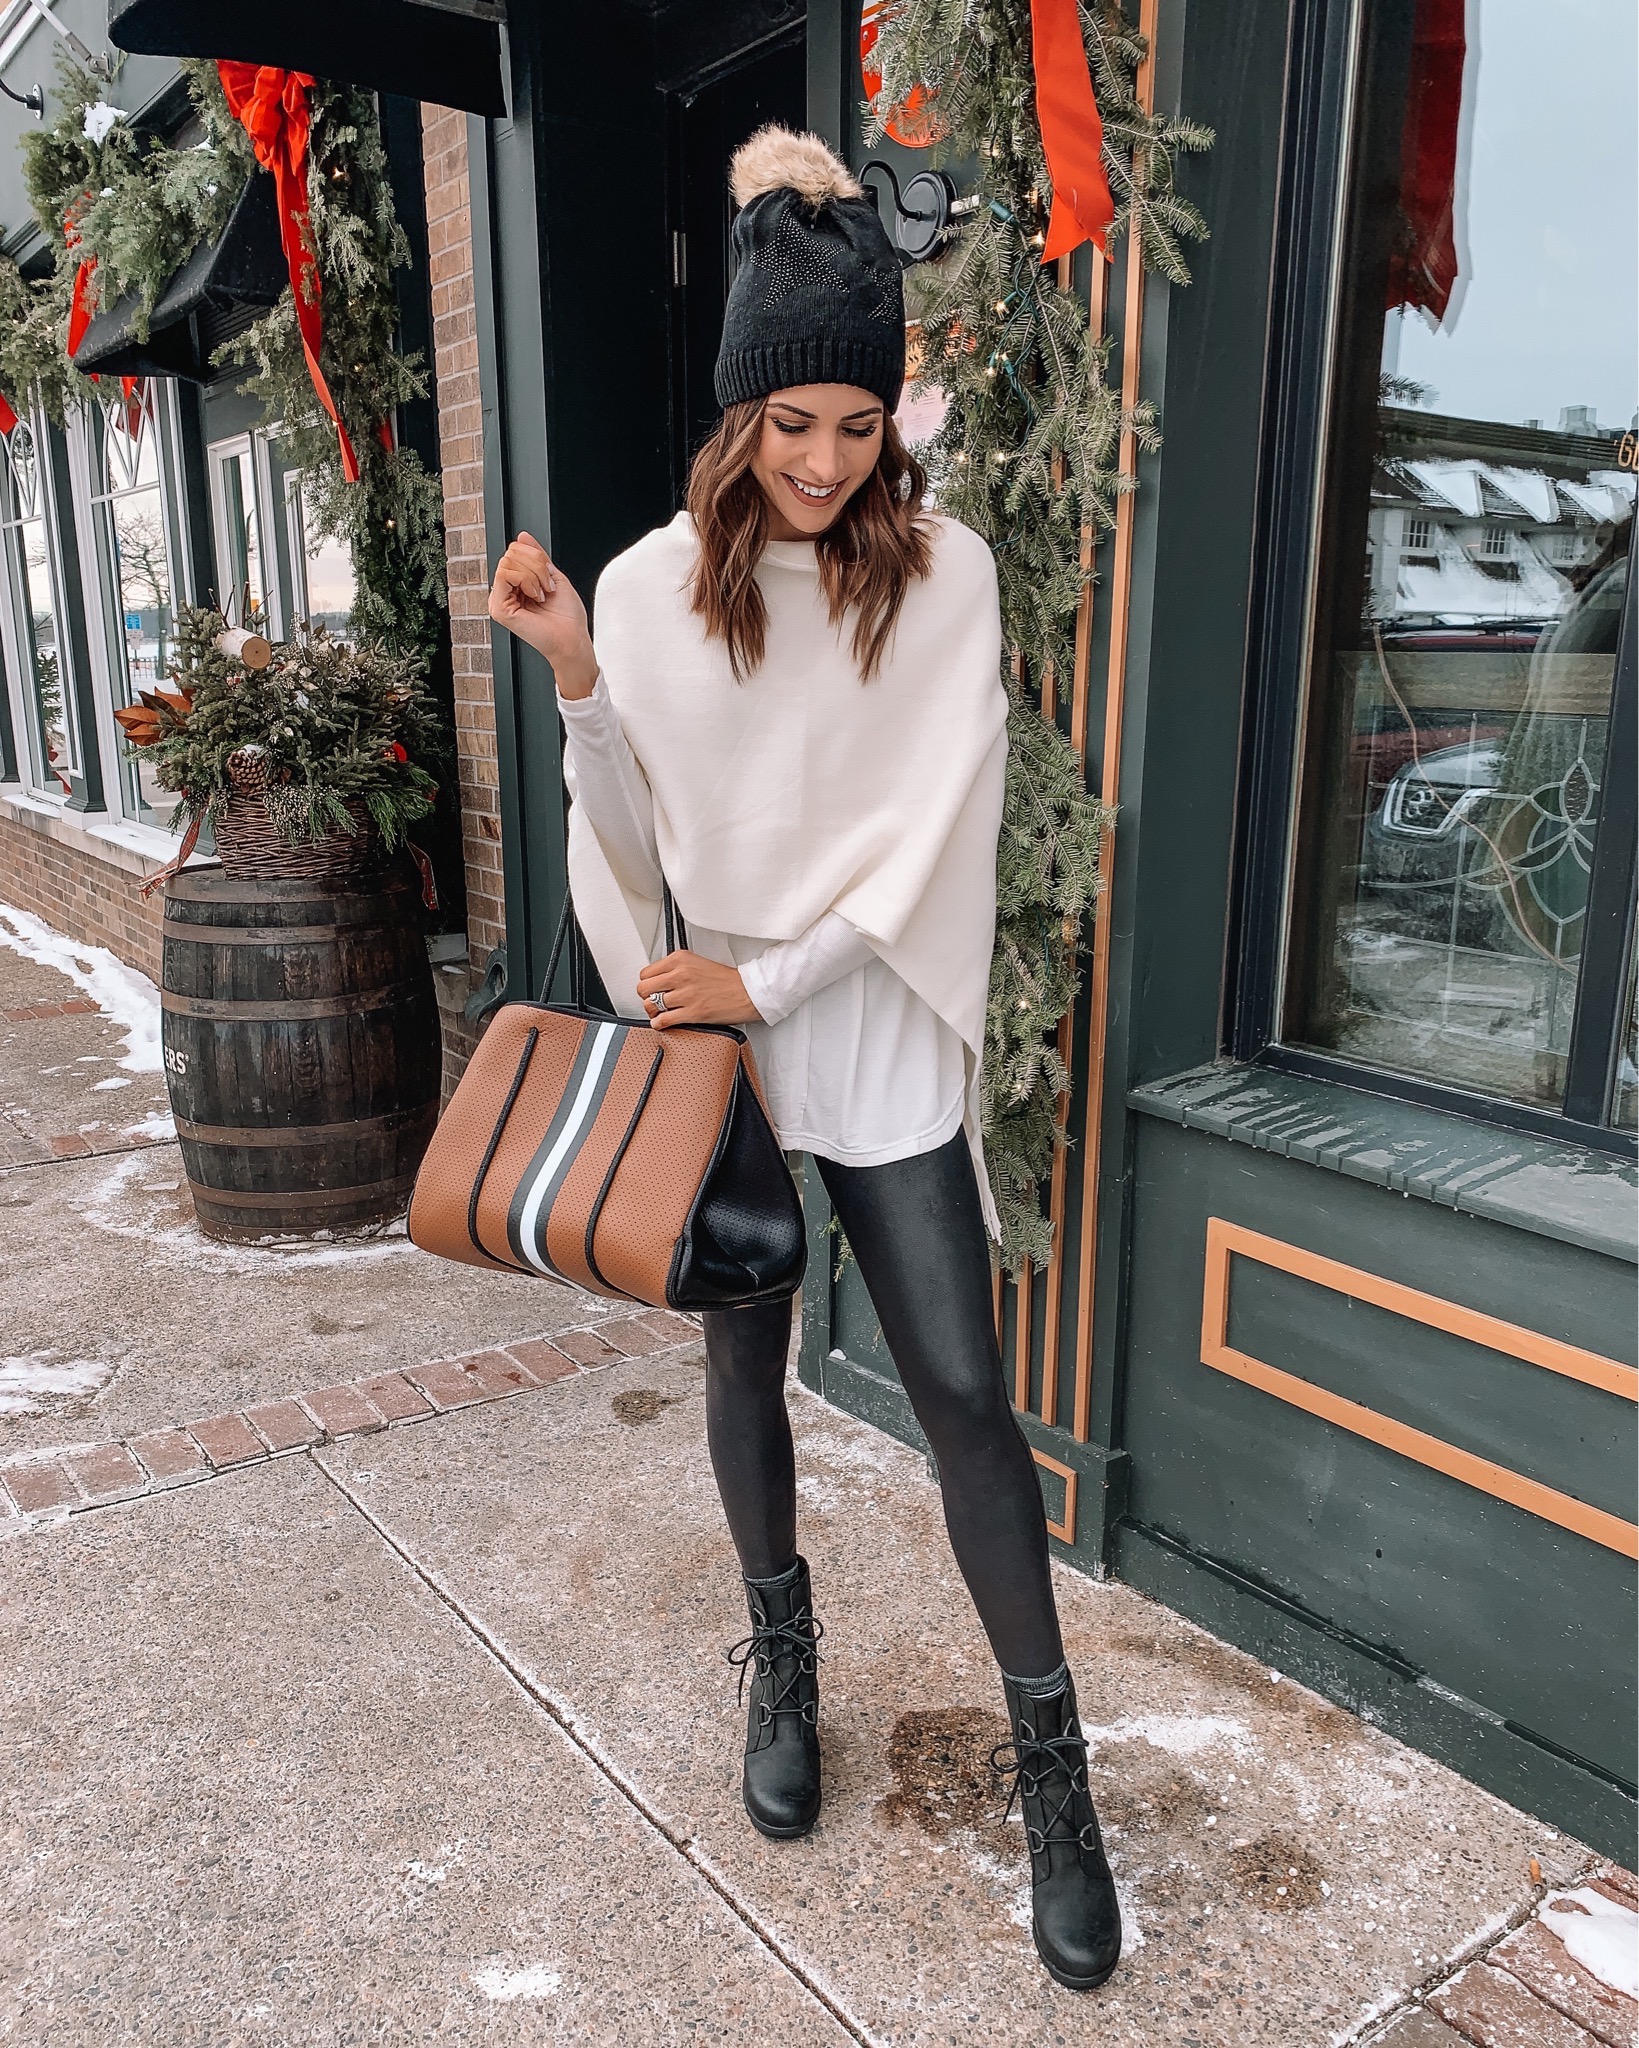 sorel-joan-of-arctic-black-boots-outfit - The Styled Press